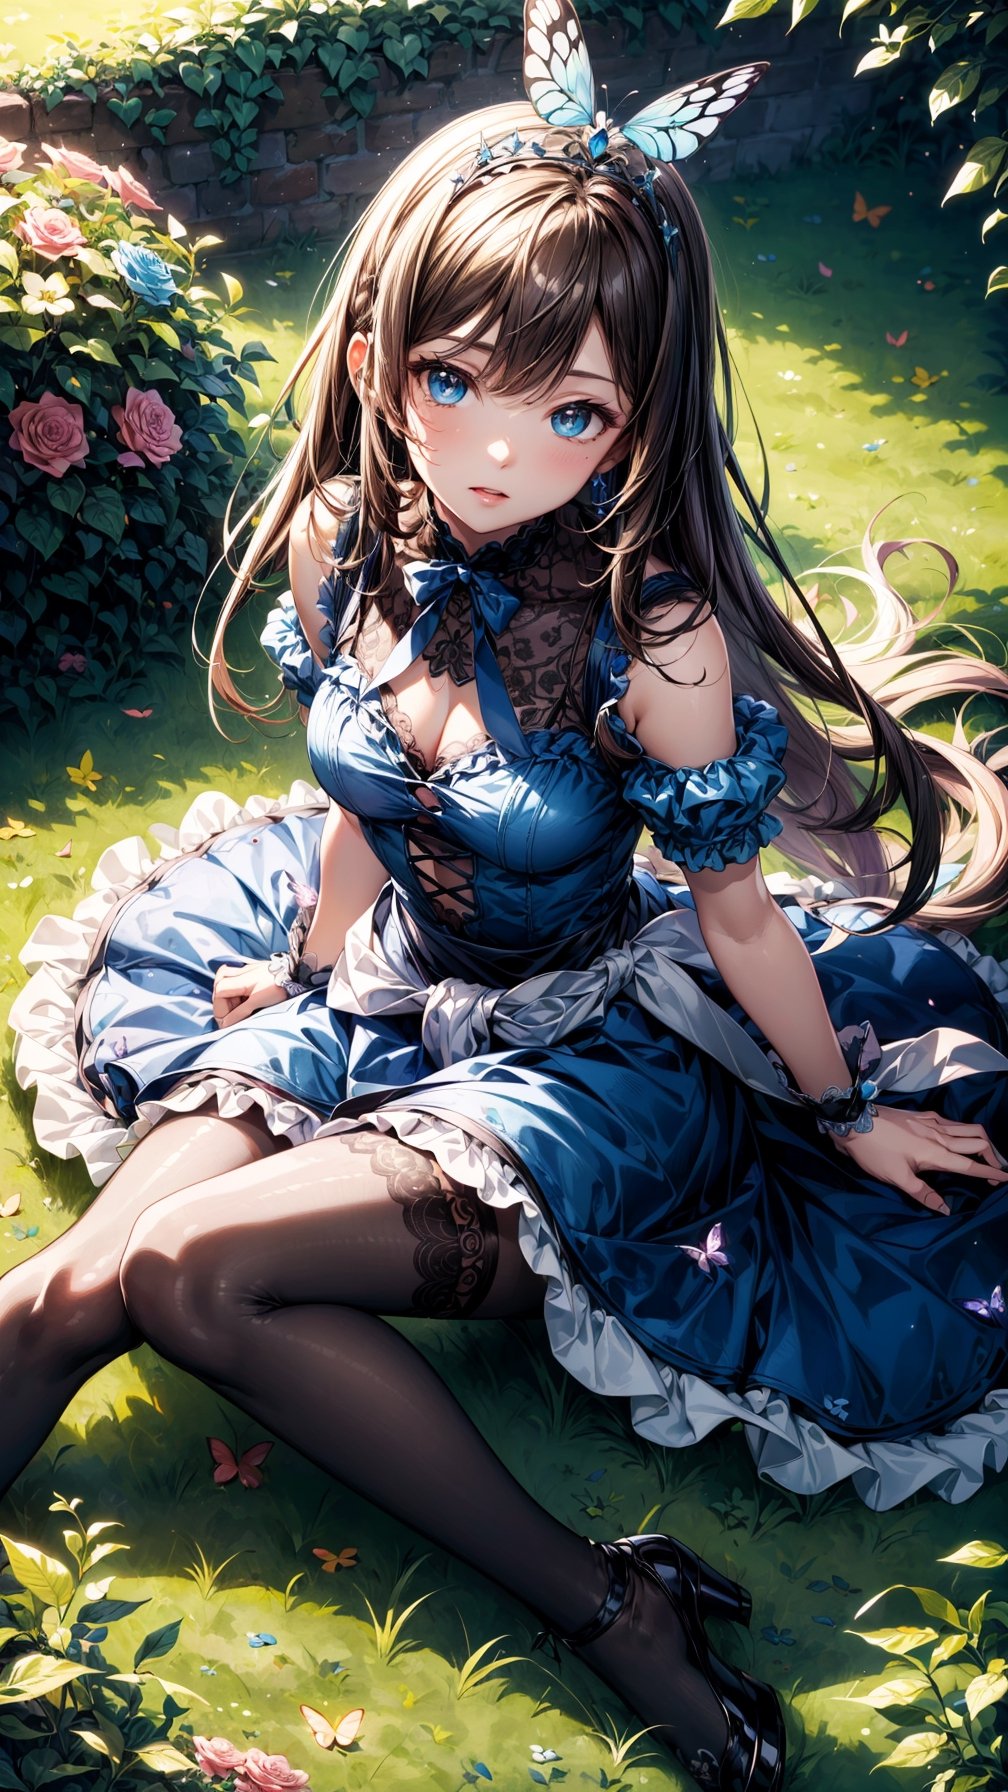 (best quality, masterpiece, illustration, designer, lighting), (extremely detailed CG 8k wallpaper unit), (detailed and expressive eyes), detailed particles, beautiful lighting, a cute girl, long blonde hair, wearing a teddy bear tiara, donning a beautiful blue and white dress with ruffles and lace, sheer pink stockings, transparent aquamarine crystal shoes, bows around her waist (Alice in Wonderland), butterflies around, (Pixiv anime style),(manga style),background, garden, colored flowers,butterflies, flowers, flowers covering her, (aerial view), grass, leaning on flowers, sitting,  looking to viewer, flower background,road of flowers,drow